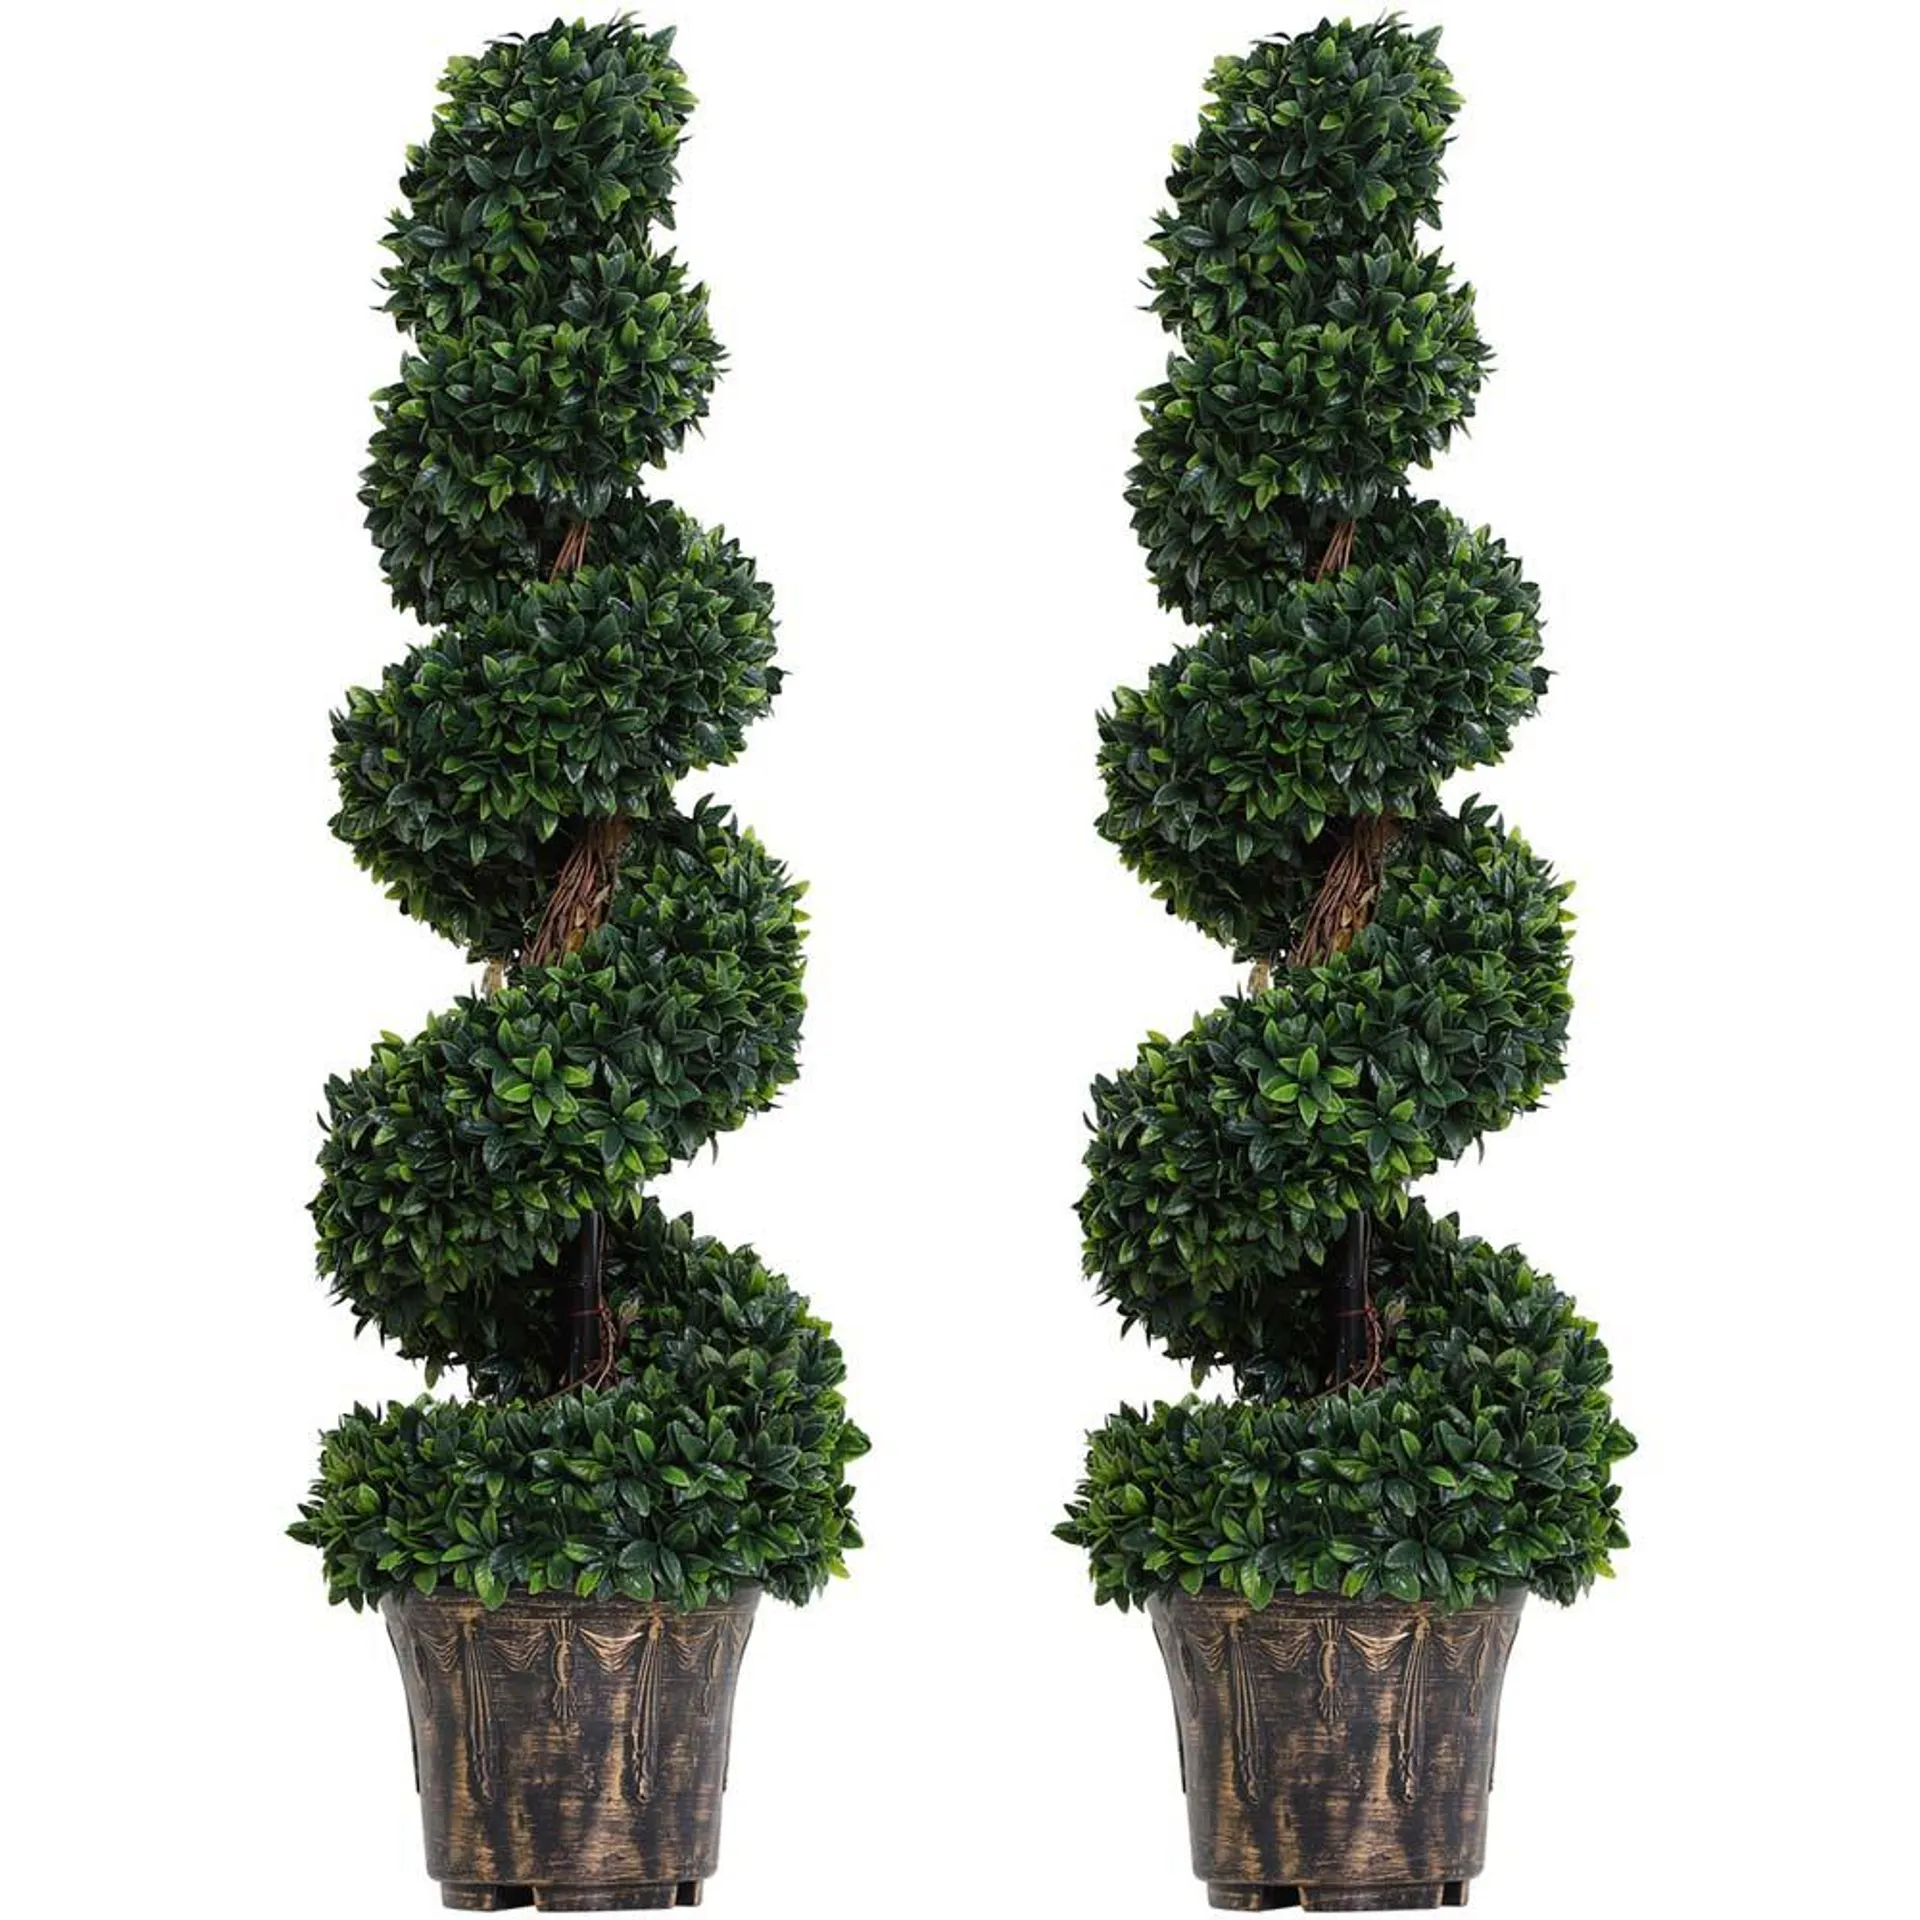 Outsunny Boxwood Spiral Tree Artificial Plant In Pot 4ft 2 Pack